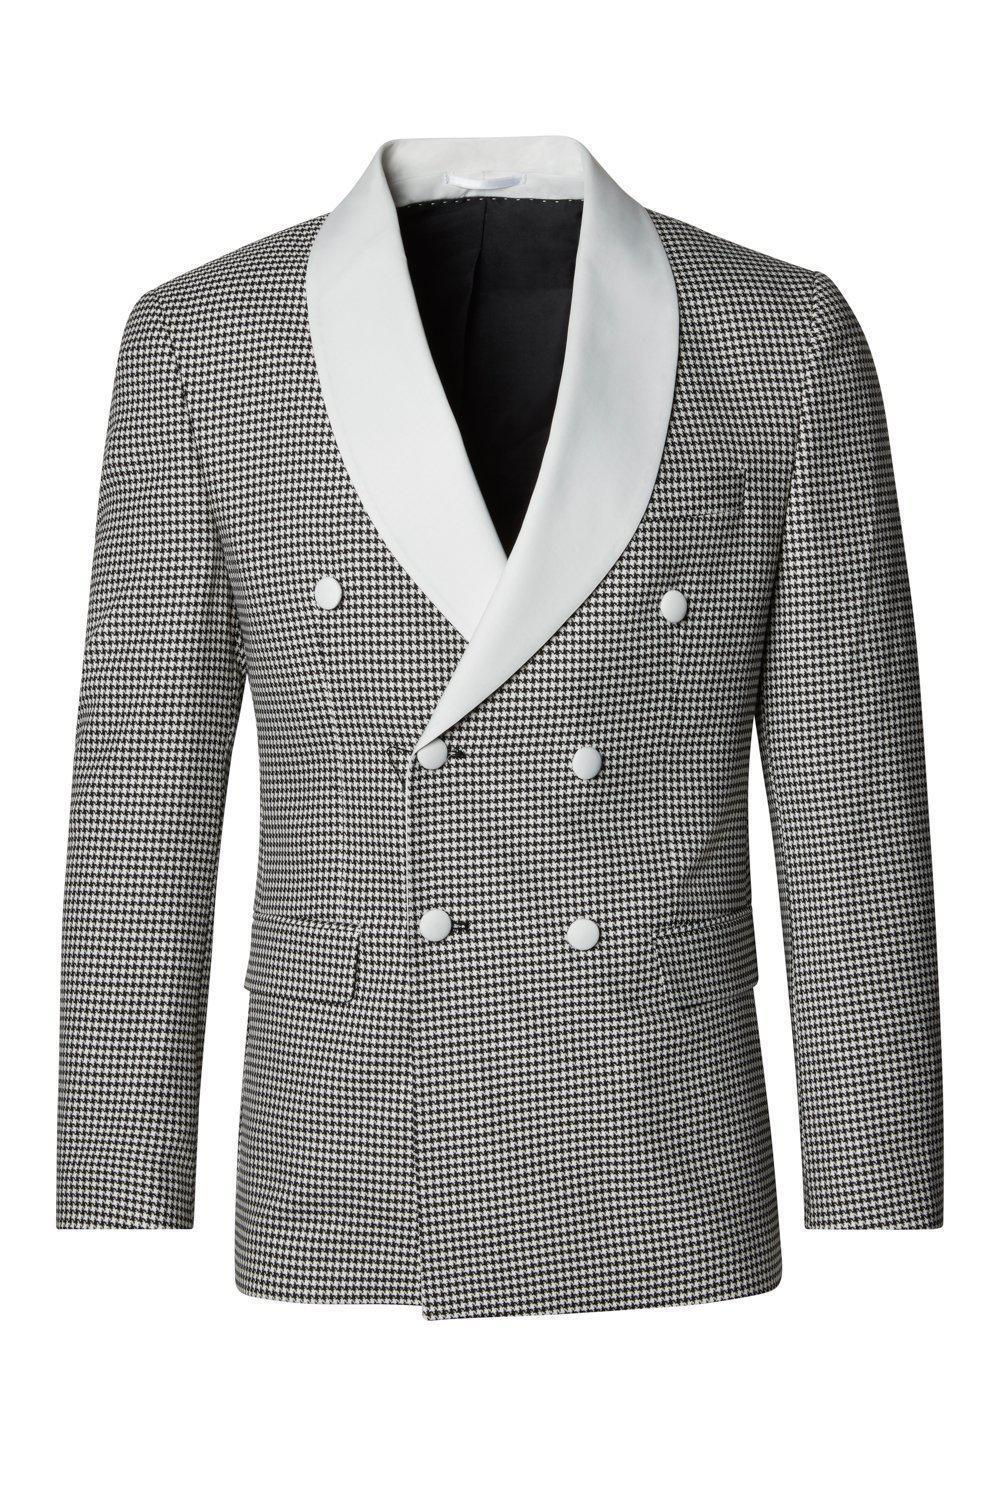 Houndstooth Double Breasted Tuxedo - Beige Black 1 - Ron Tomson